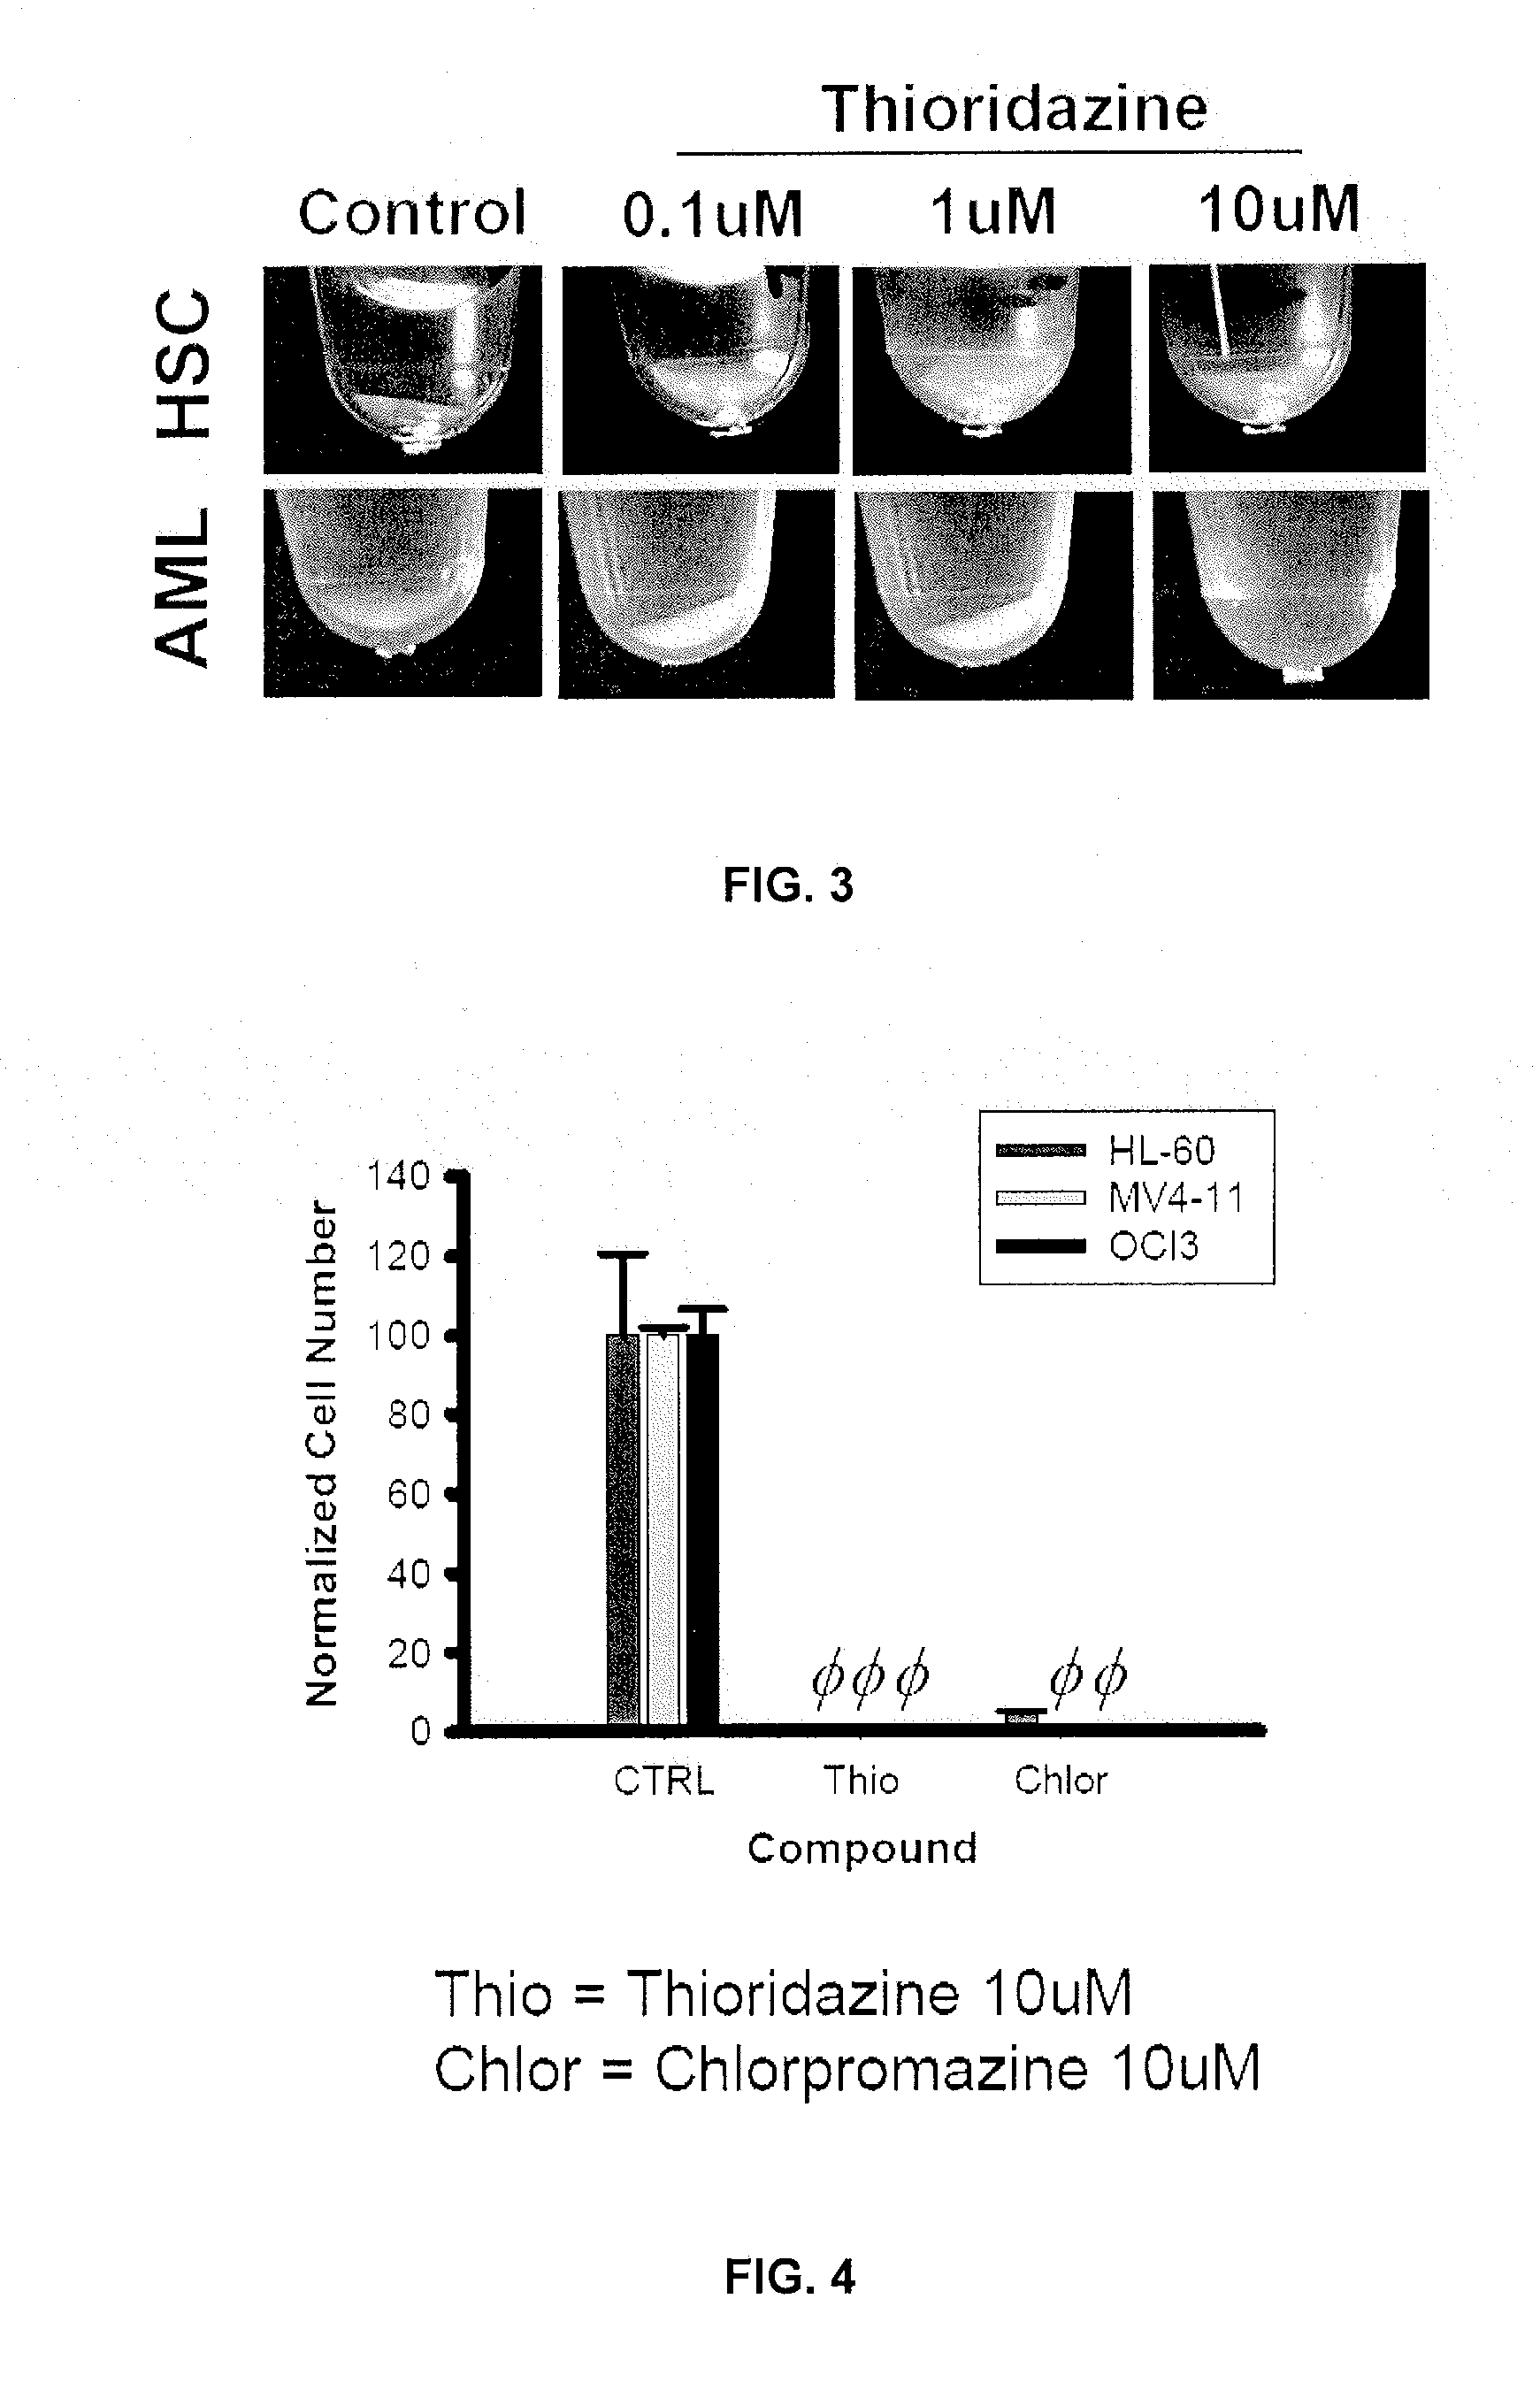 Treatment of Cancer with Dopamine Receptor Antagonists